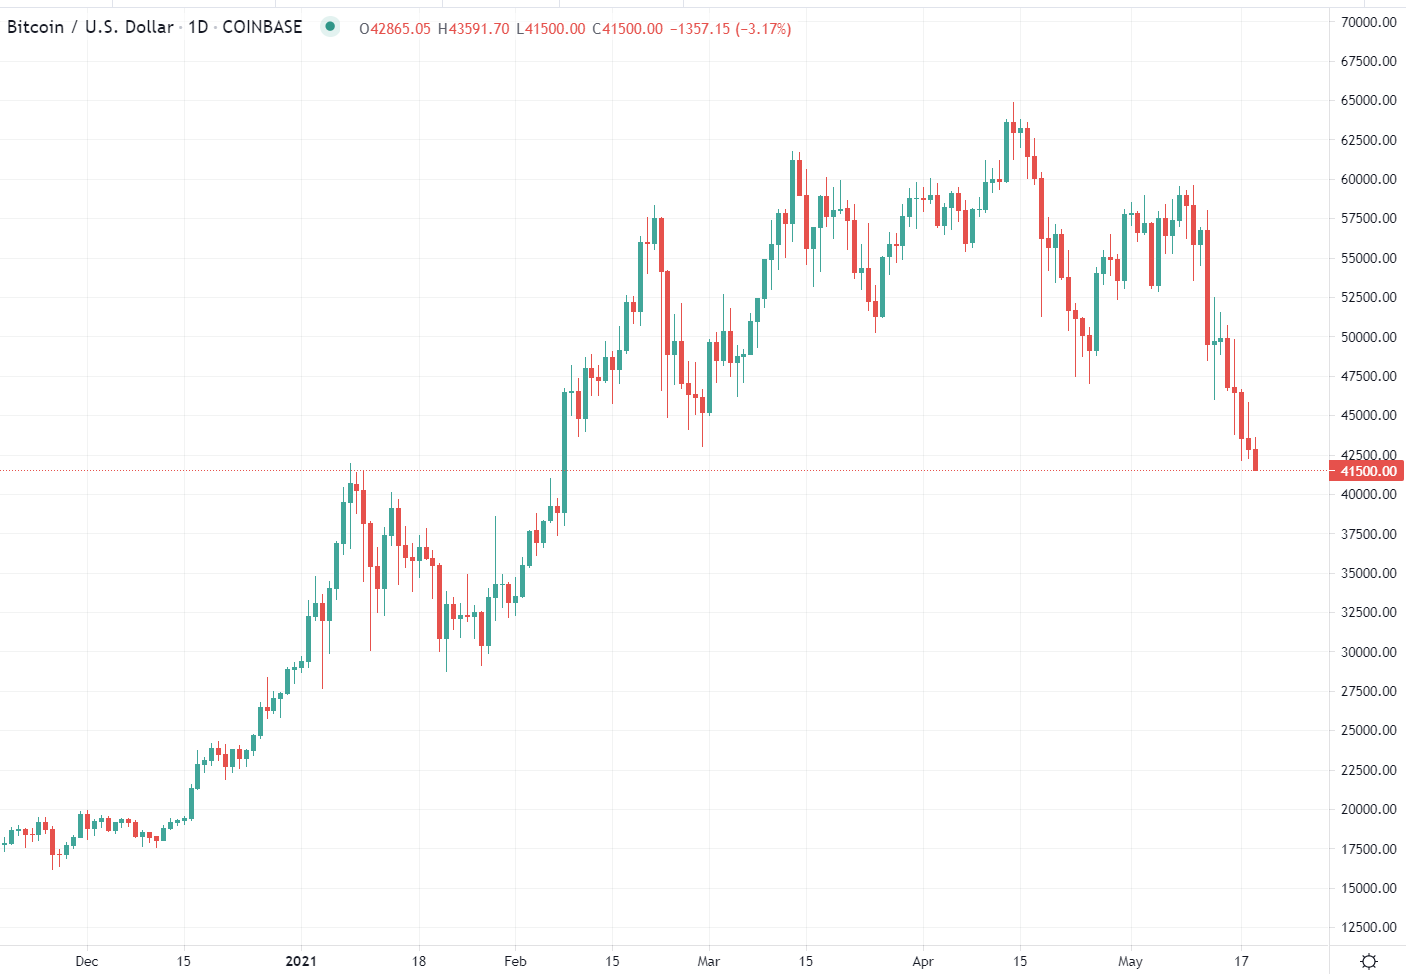 BTC/USD has been on the skids, trading to early February lows now. 